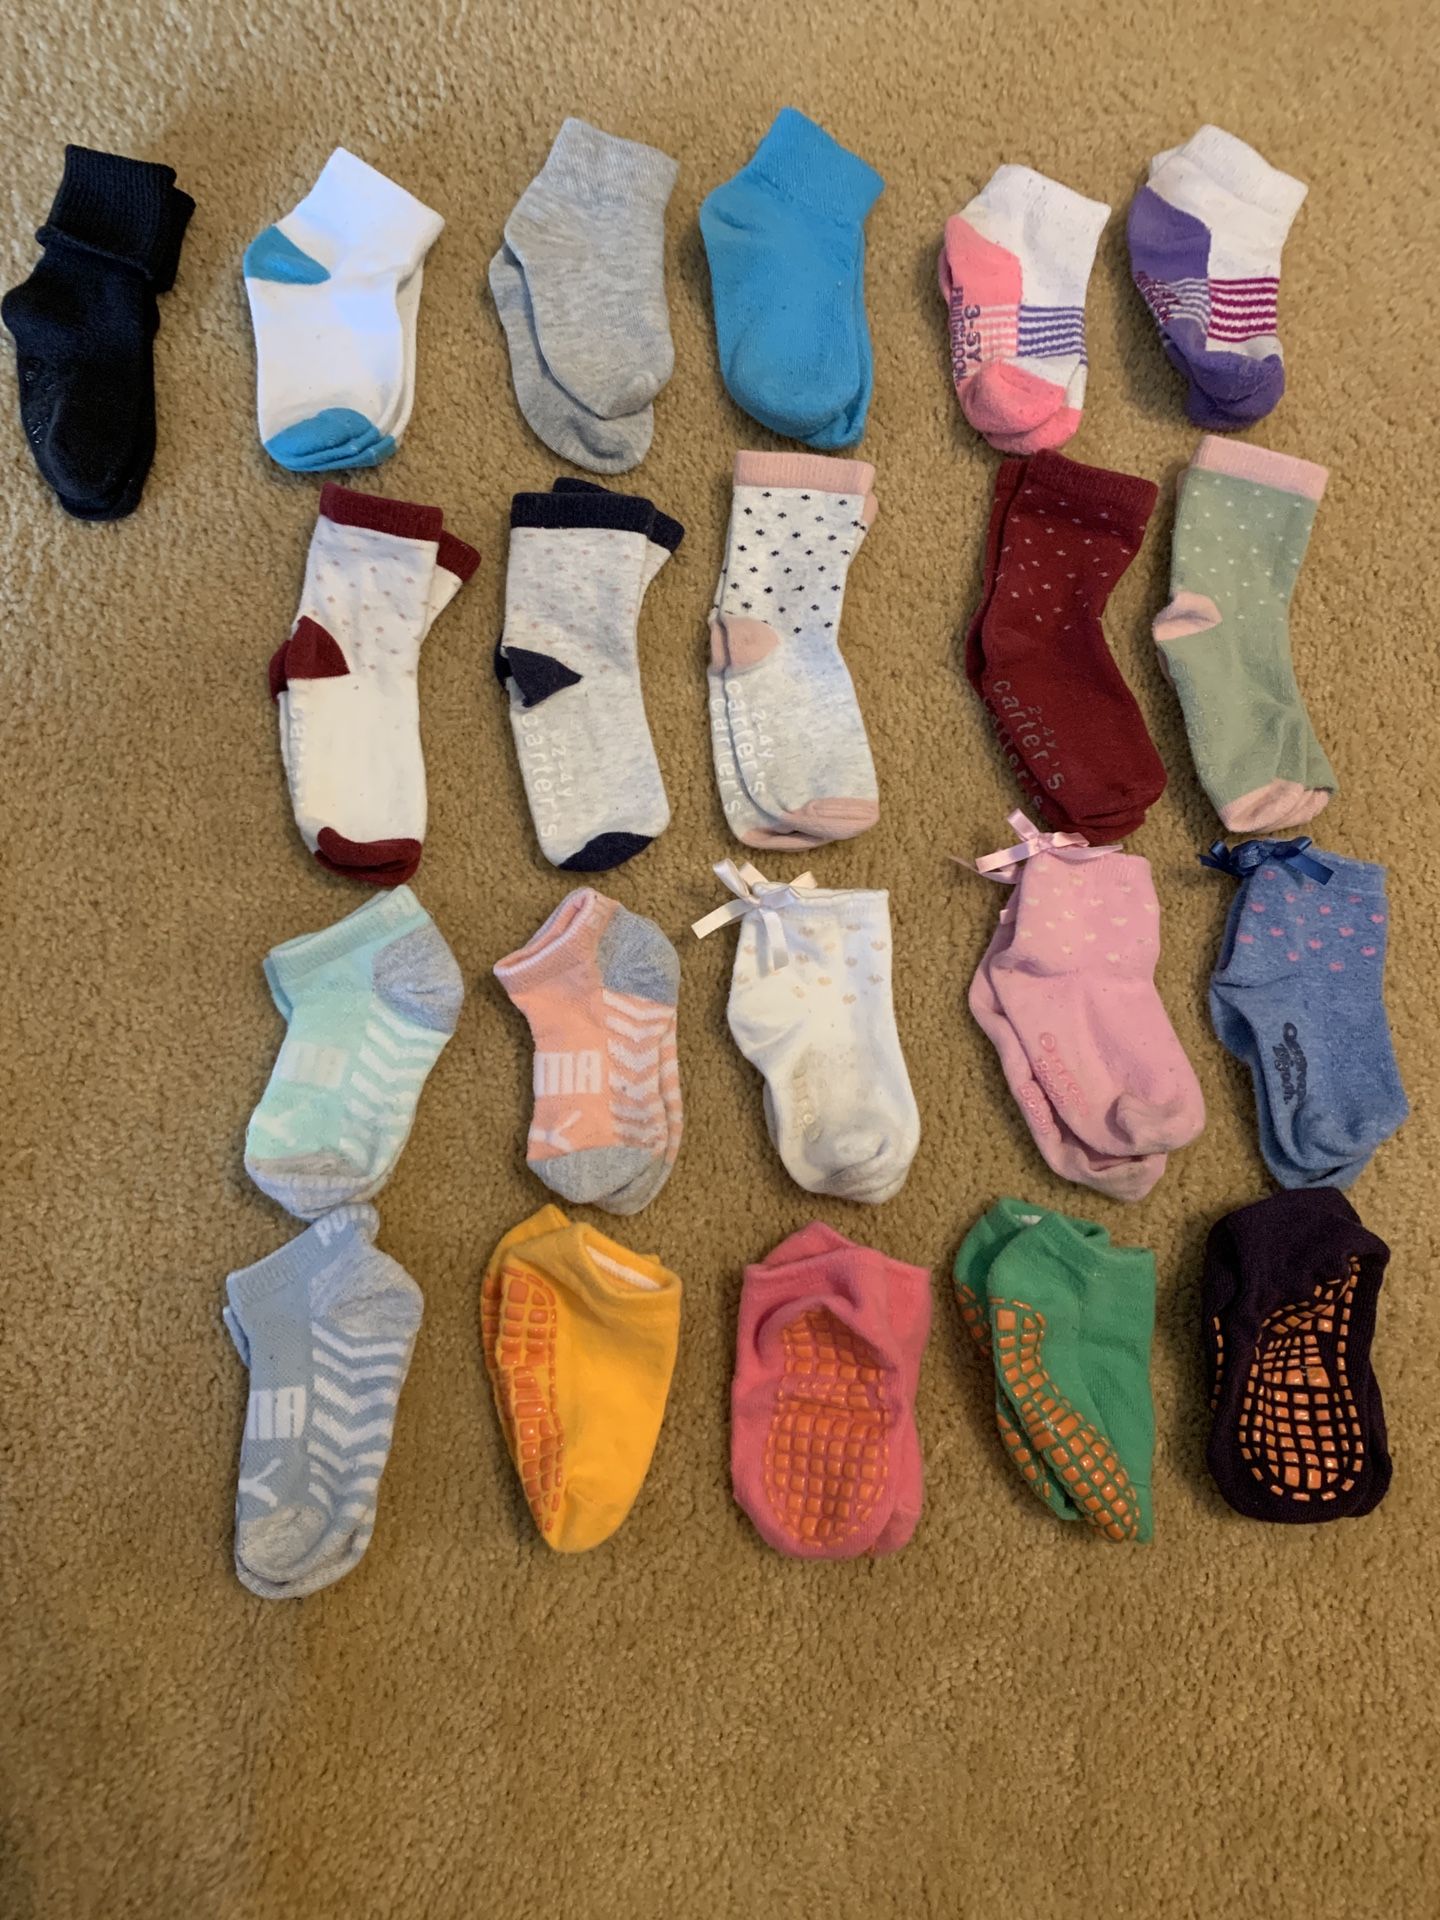 Size 2-4 Toddler socks. 21 Pairs Total; (17 Pair of Girls socks and a 4 pair of slipper socks).Some brands like: Carter’s, OshKosh, Puma. (2 are sized